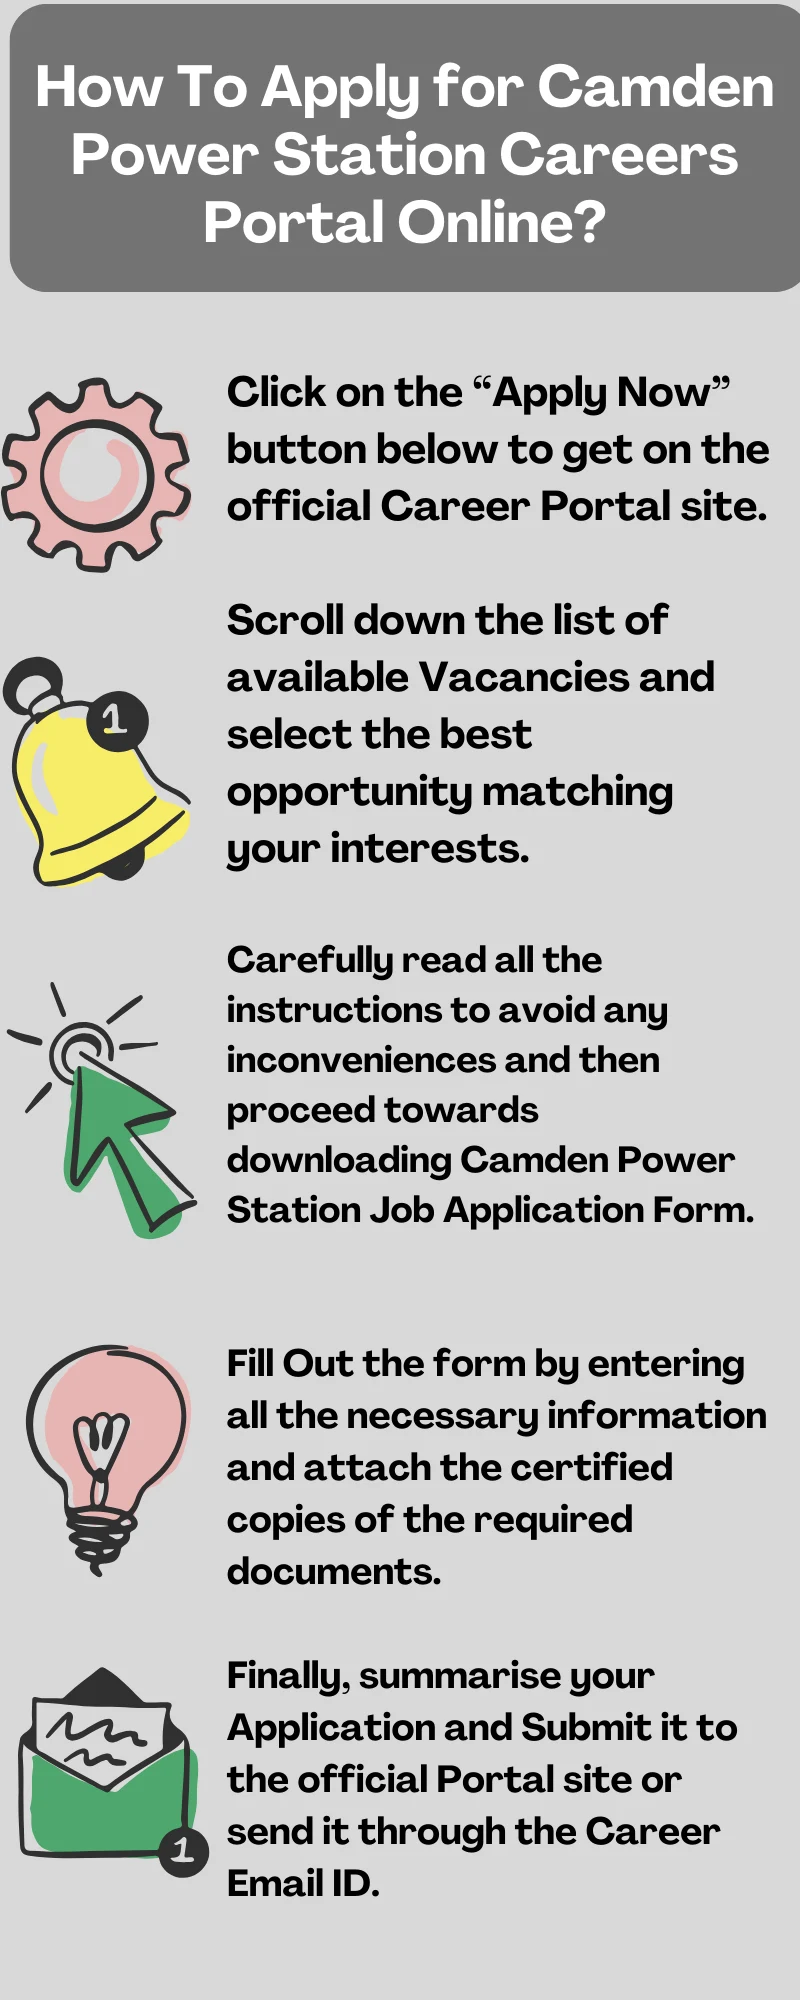 How To Apply for Camden Power Station Careers Portal Online?